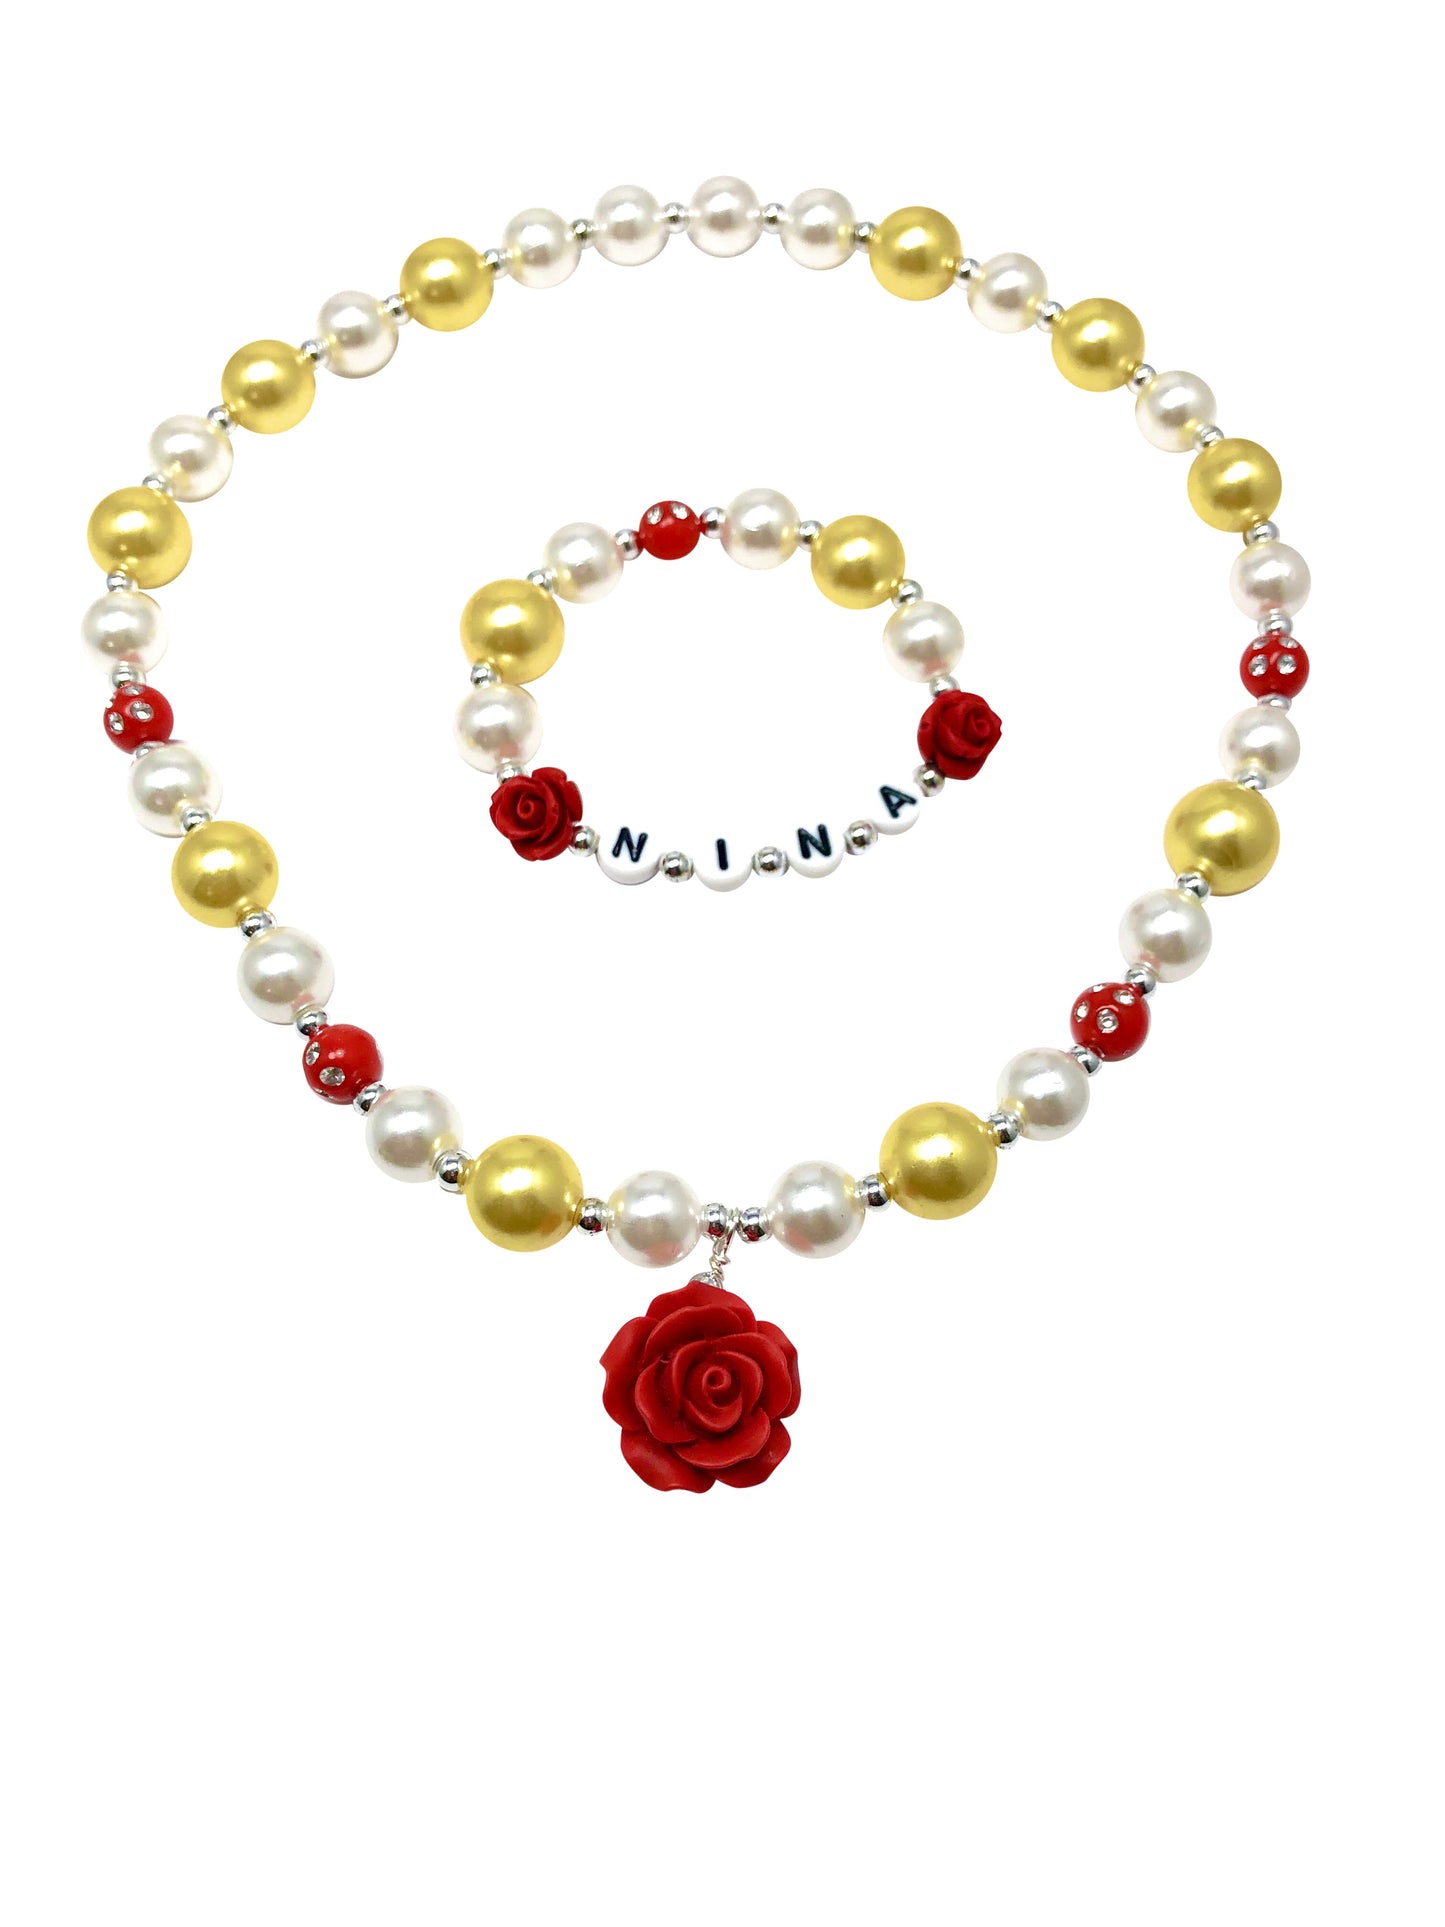 Beauty and the beast girl jewelry set /  Girls rose necklace / Yellow white red